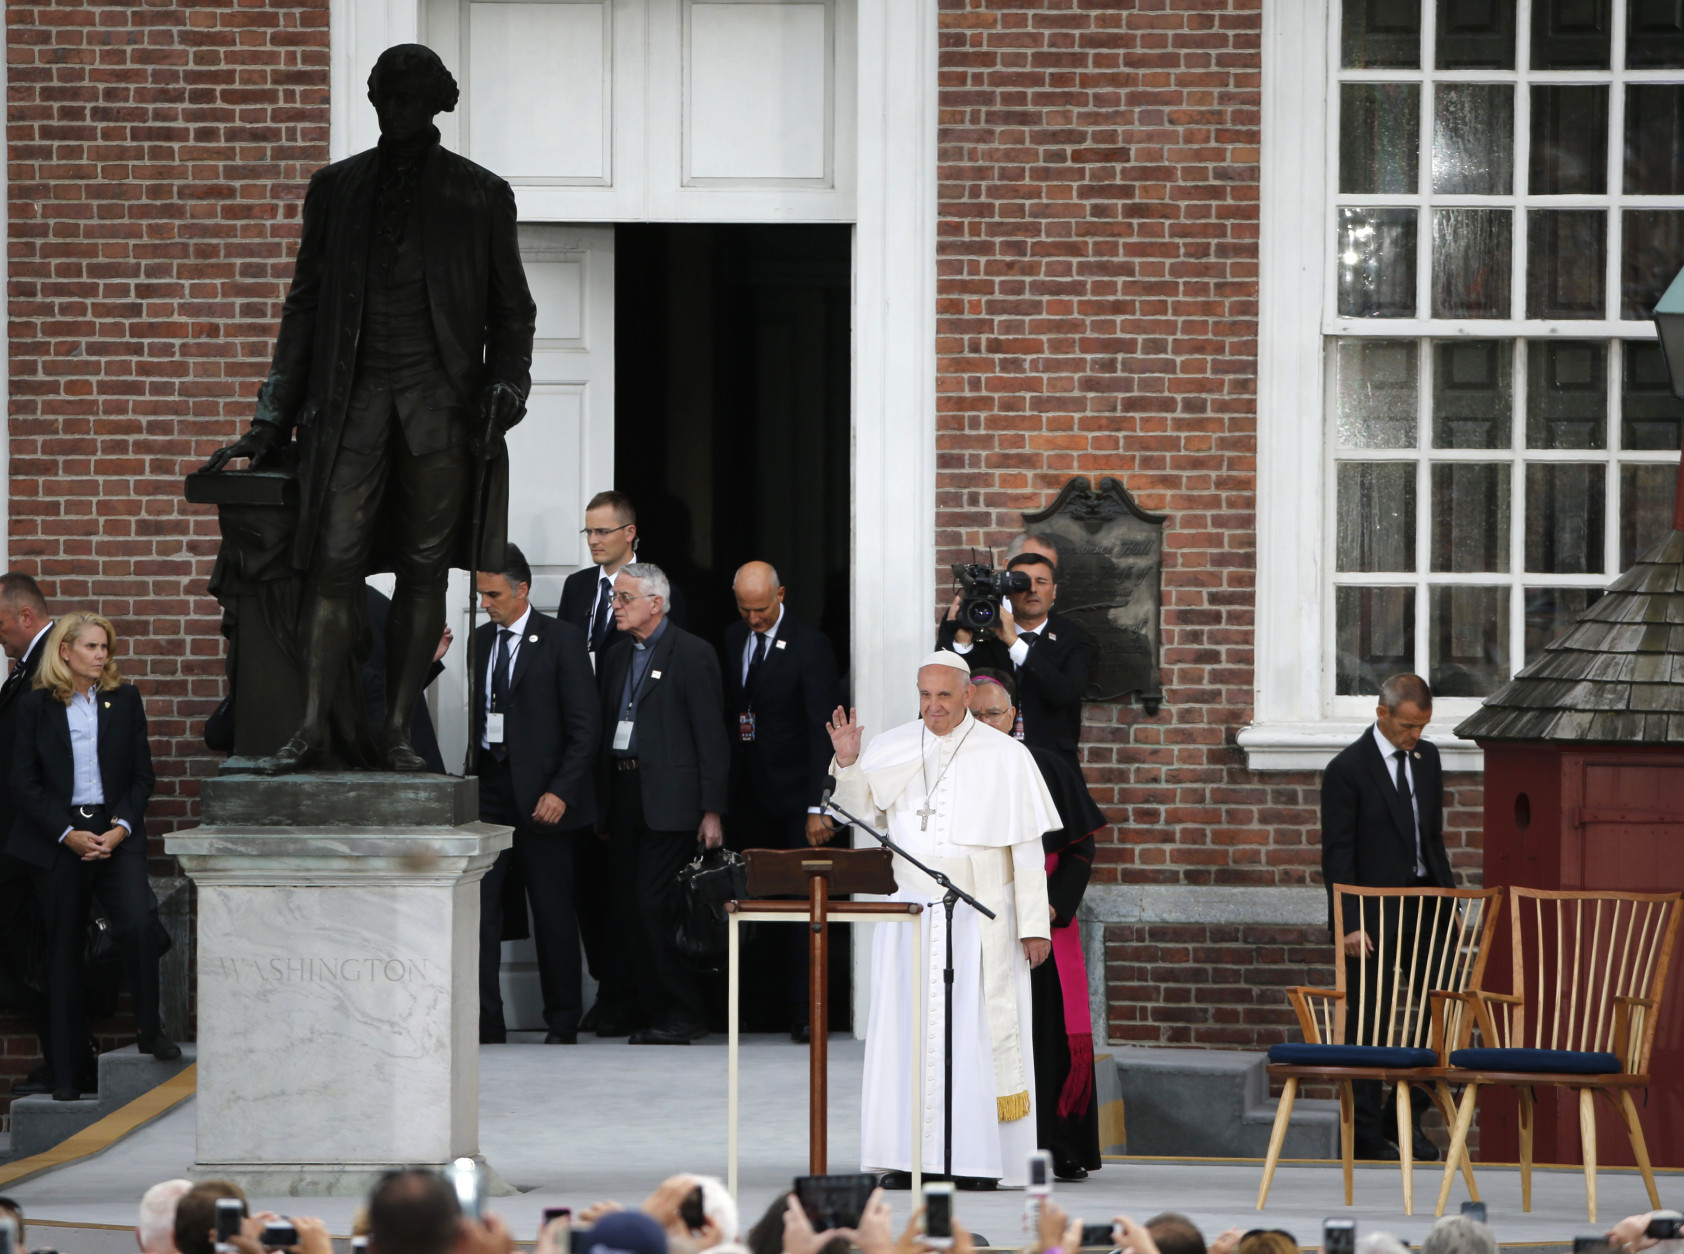 PHILADELPHIA, PA - SEPTEMBER 26: Pope Francis speaks at Independence Mall to watch Pope Francis speak in Philadelphia onSeptember 26, 2015 in Philadelphia., Pennsylvania. After visiting Washington and New York City, Pope Francis concludes his tour of the U.S. with events in Philadelphia on Saturday and Sunday. (Photo by Jim Bourg-Pool/Getty Images)